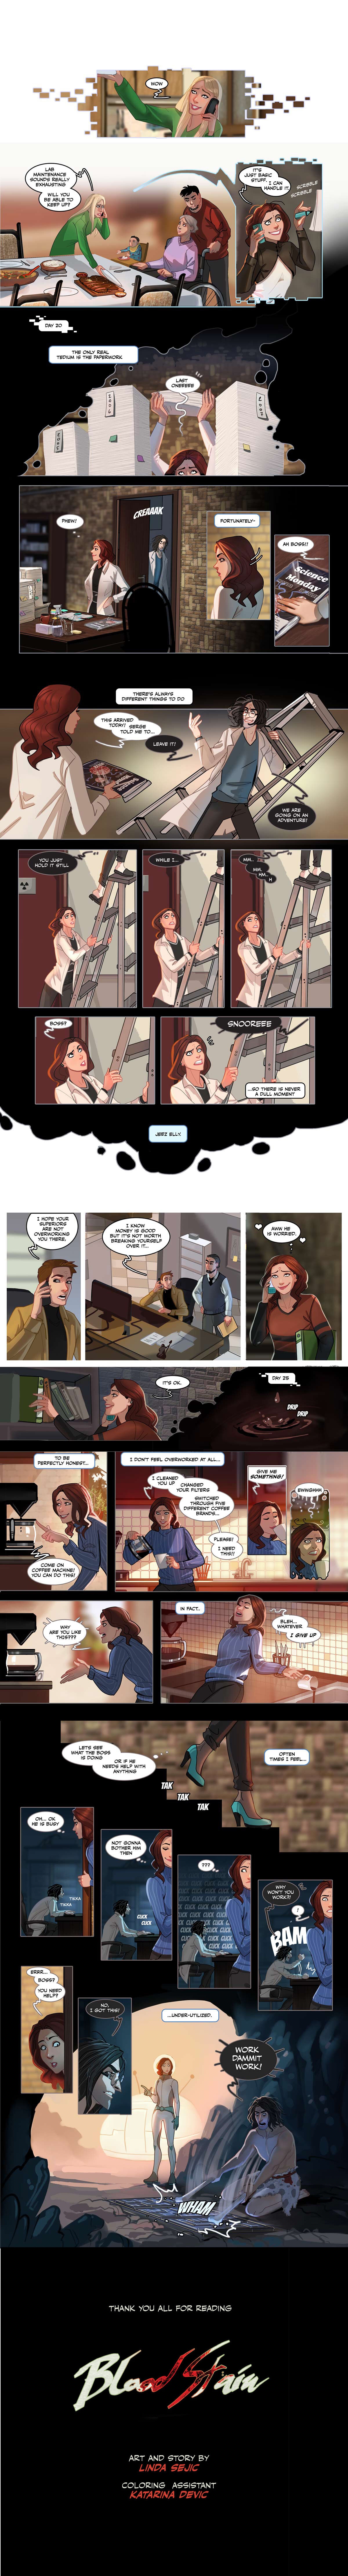 Blood Stain ch. 4 (ongoing) [Linda Sejic / Sigeel] 20